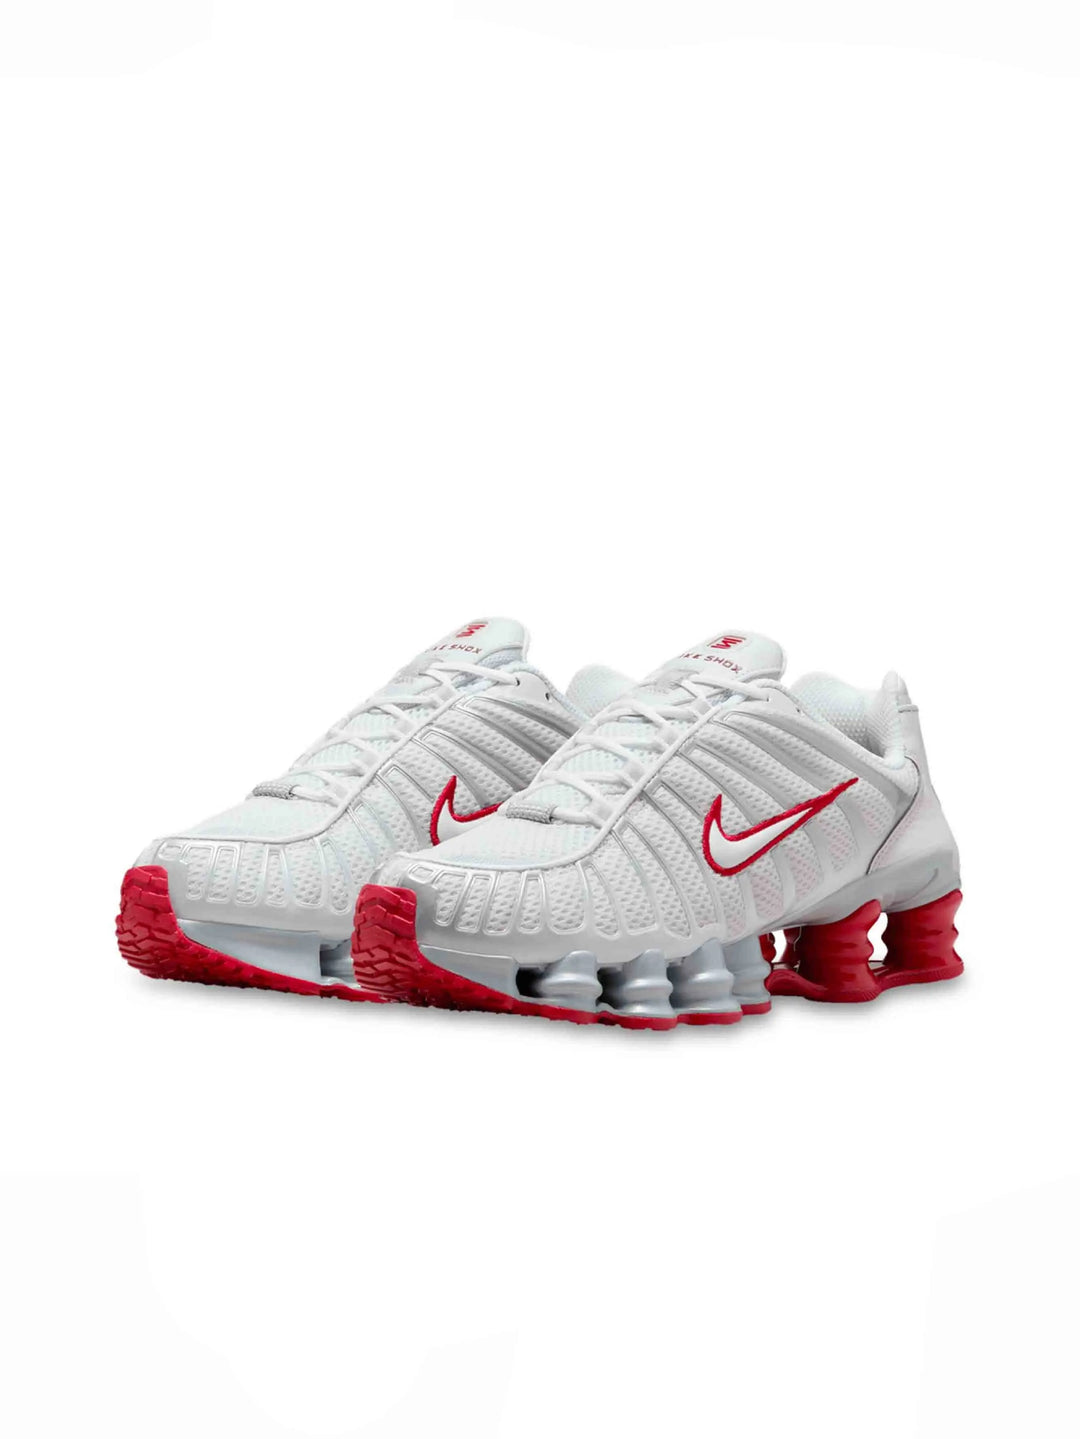 Nike Shox TL Platinium Tint (W) in Auckland, New Zealand - Shop name